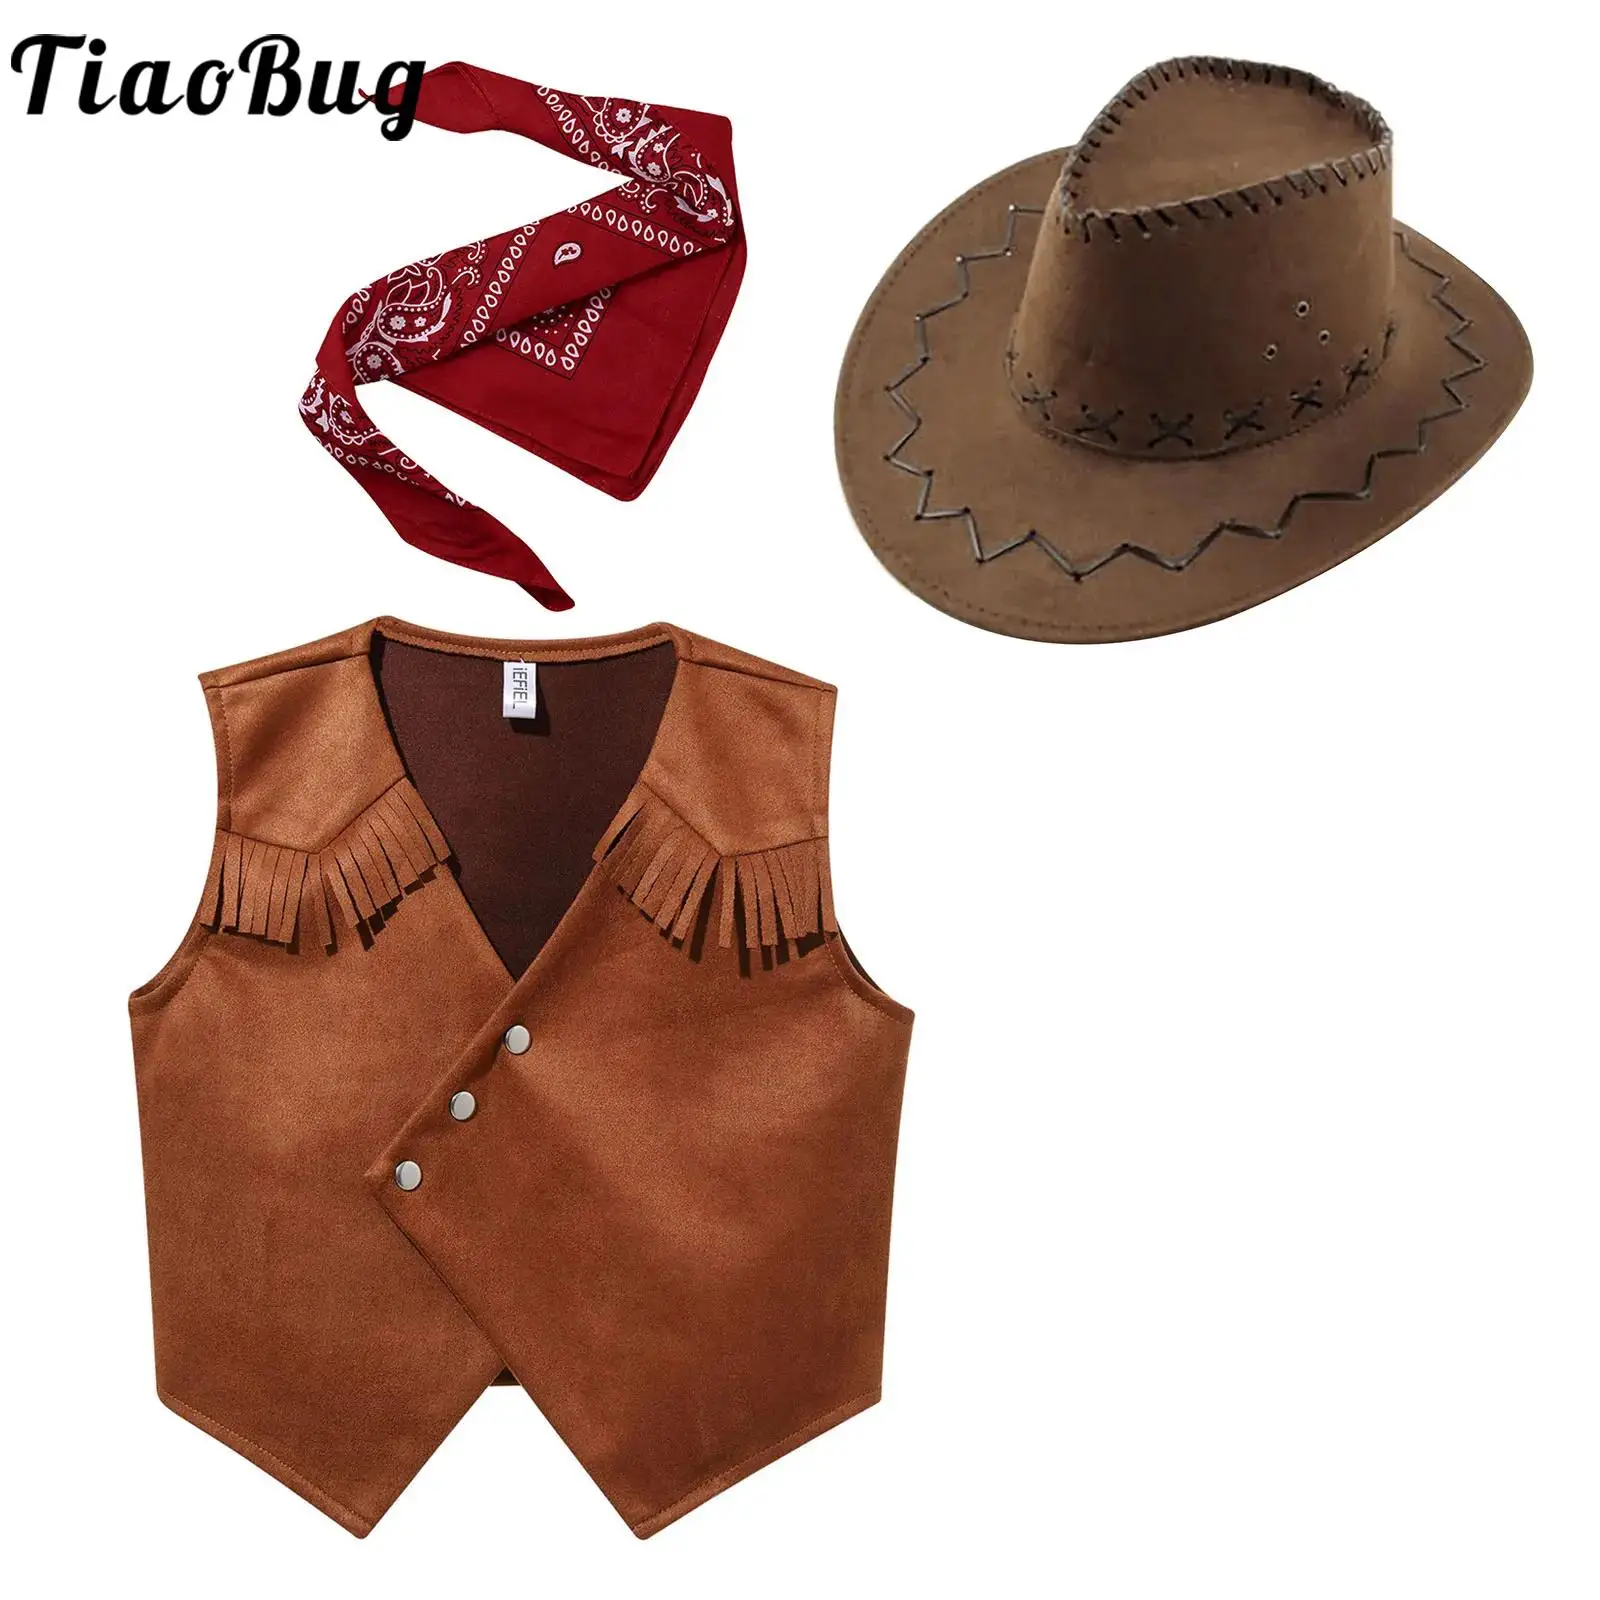 Western Cowboy Costume for Kids Halloween Cosplay Cowboy Cowgirl Dress Up Fringe Suede Leather Vest with Bandanna Hat Set